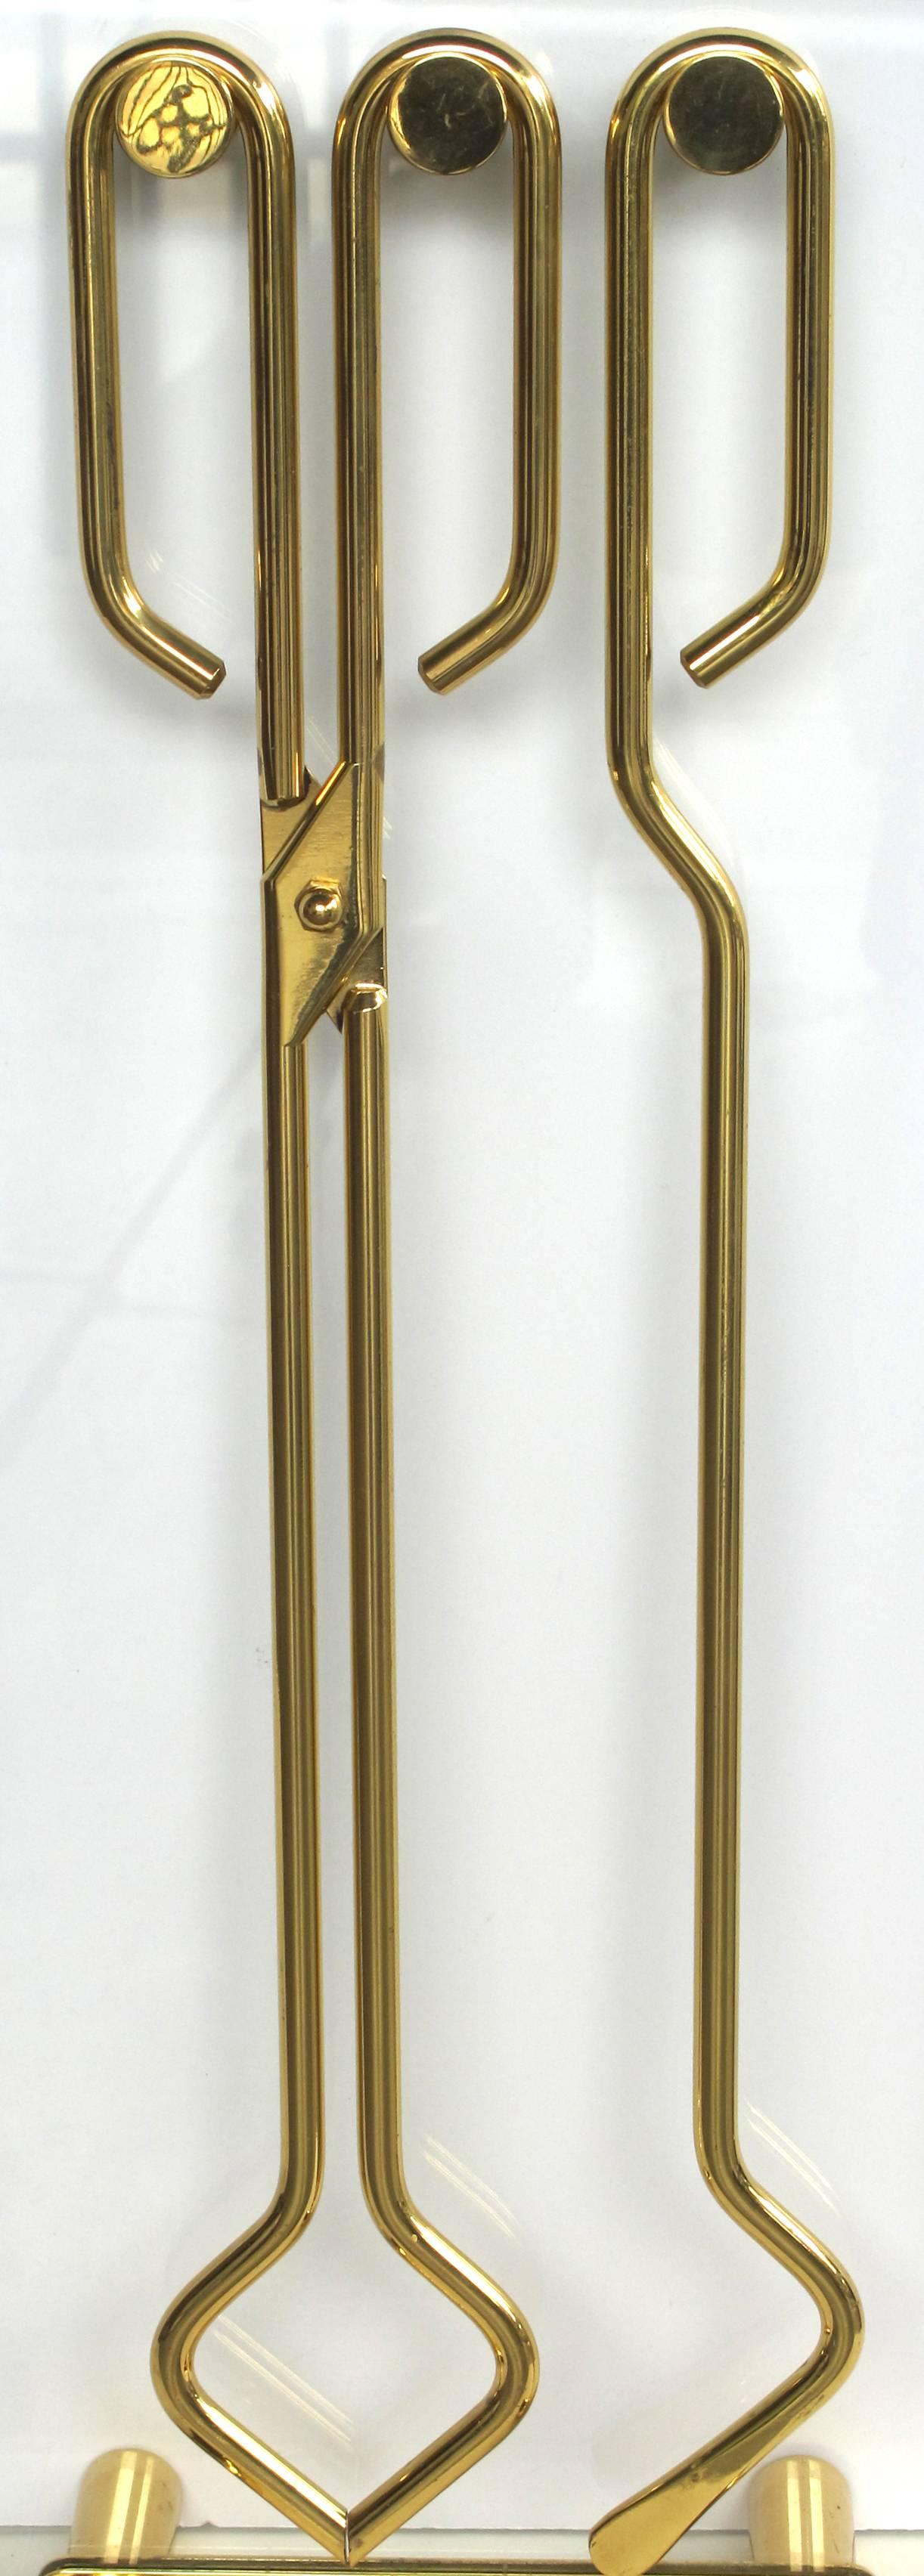 A stylish French 1960s gilt-metal and glass fire-tool set in the manner of Jacques Adnet, the upright glass stand raised on cylindrical rods, with protruding knobs suspending two tools.